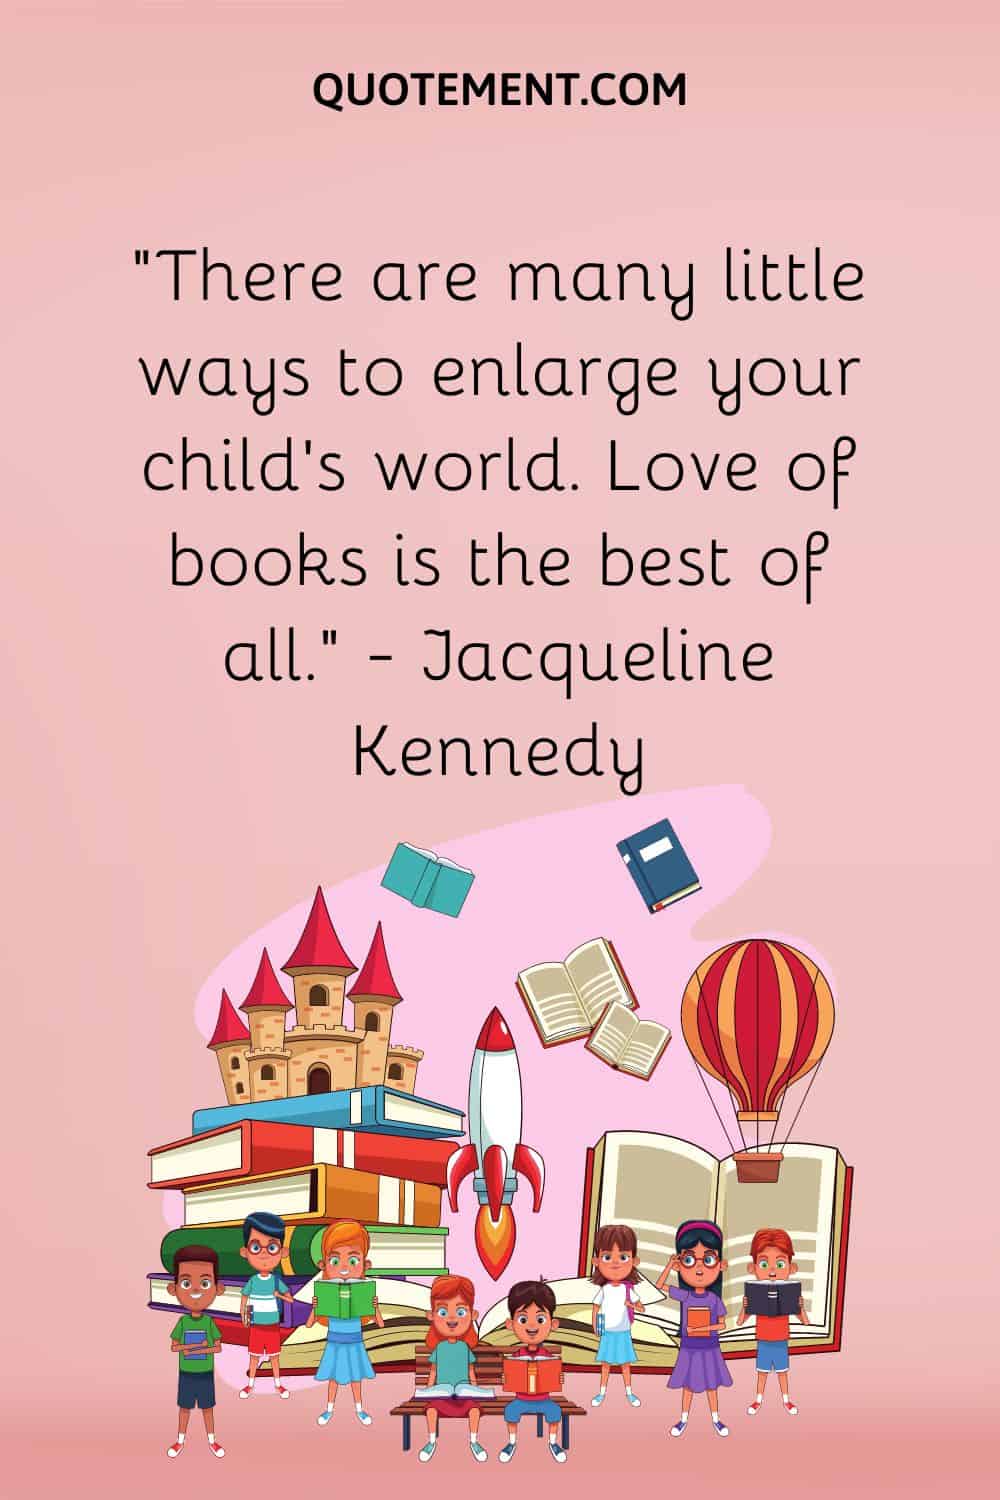 “There are many little ways to enlarge your child’s world. Love of books is the best of all.” — Jacqueline Kennedy